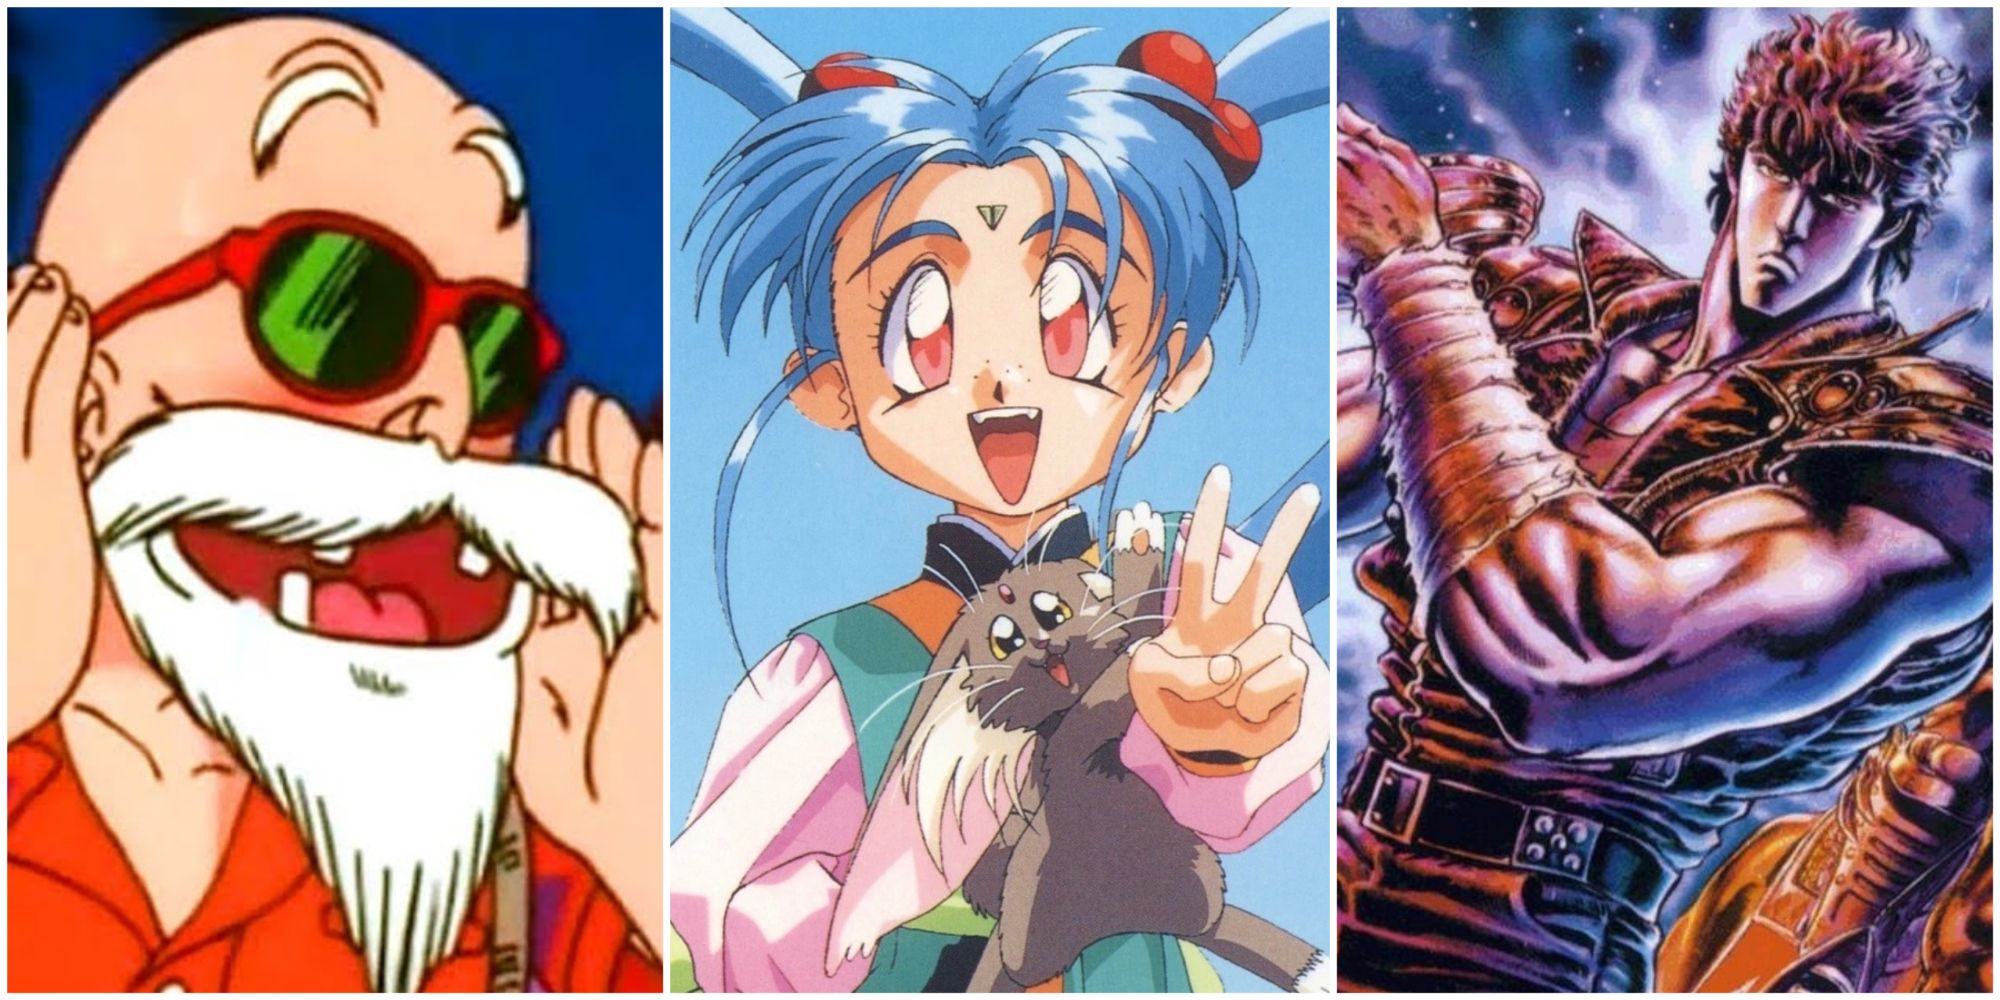 Shooting Star Dreamer: Why I Don't Follow Anime Archetypes